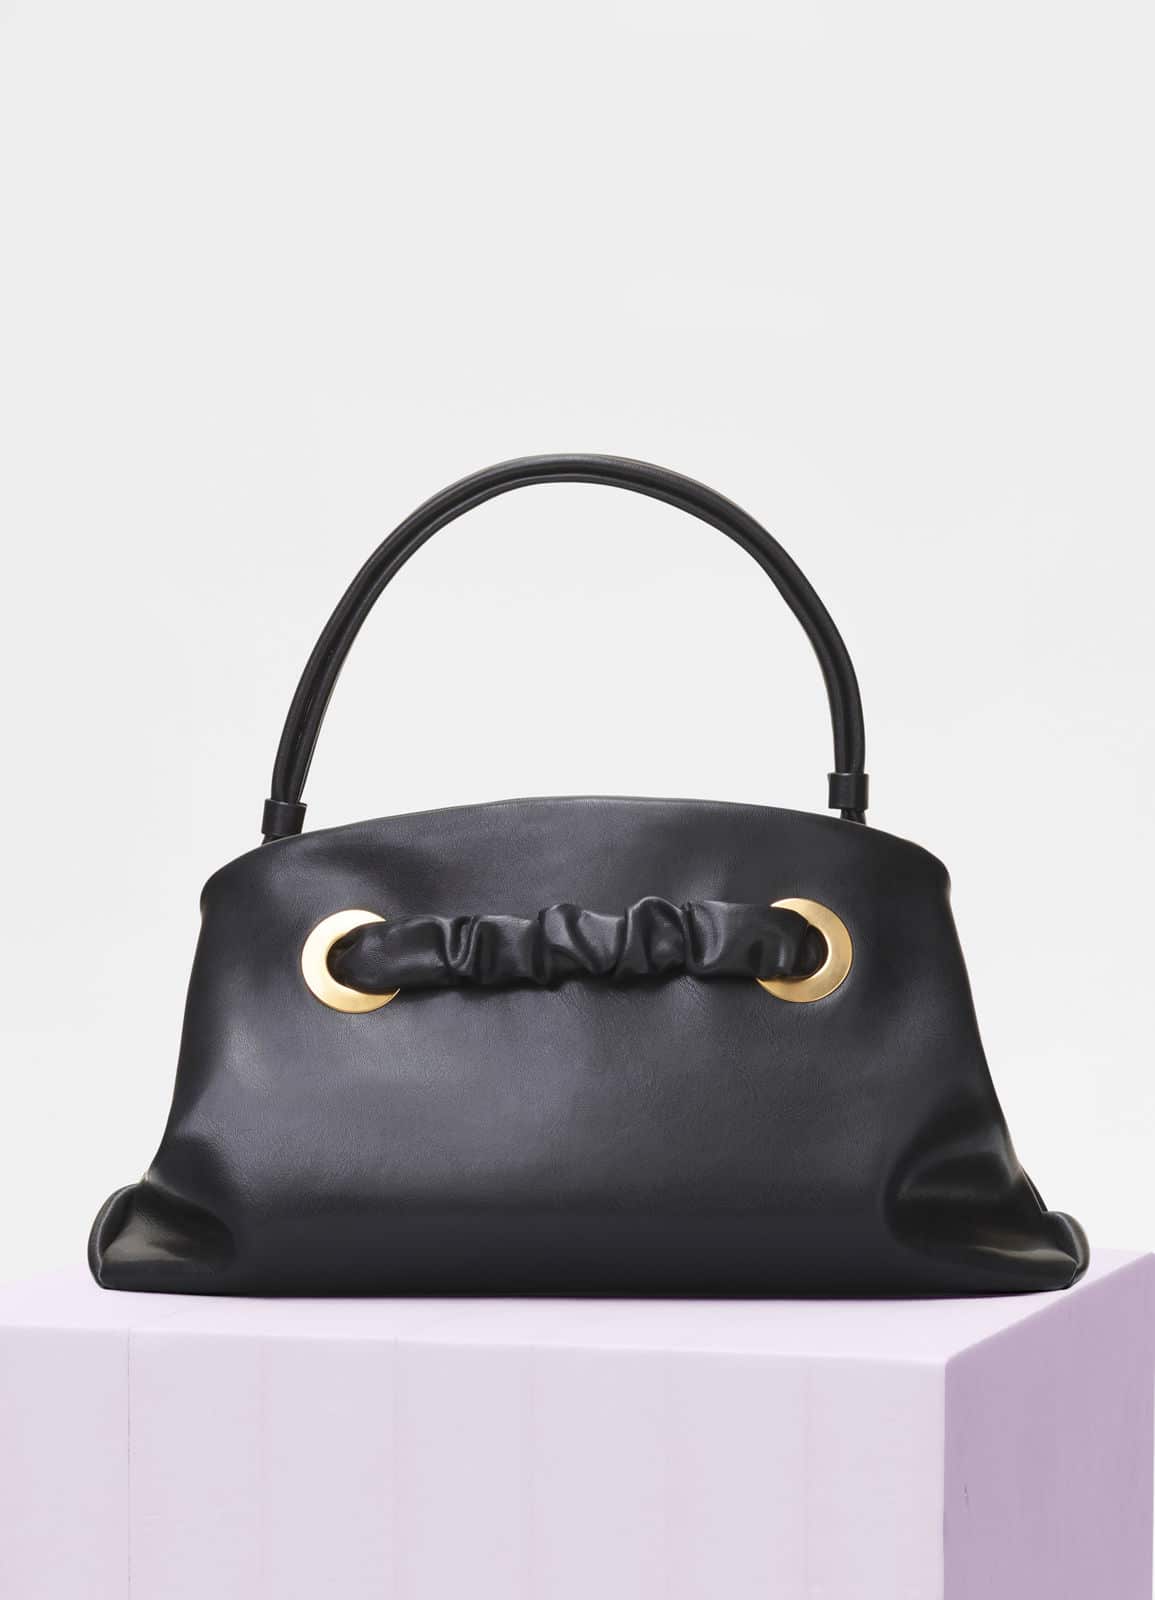 Celine Summer 2018 Bag Collection Features The Purse Bag - Spotted